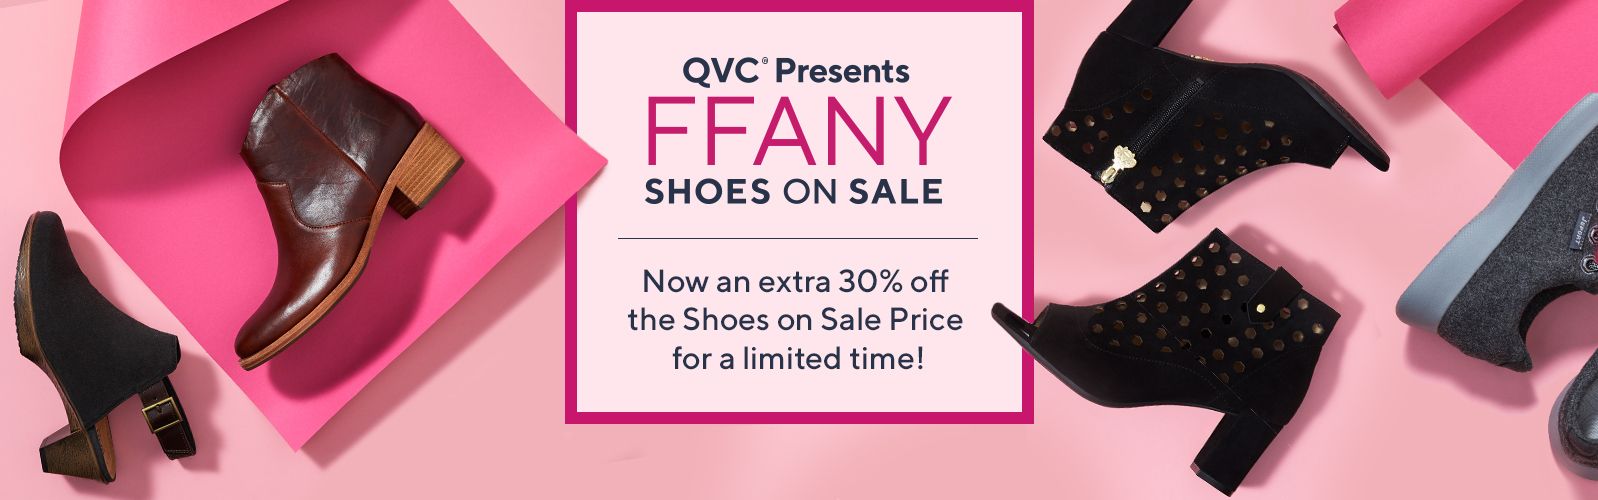 qvc shoes clearance